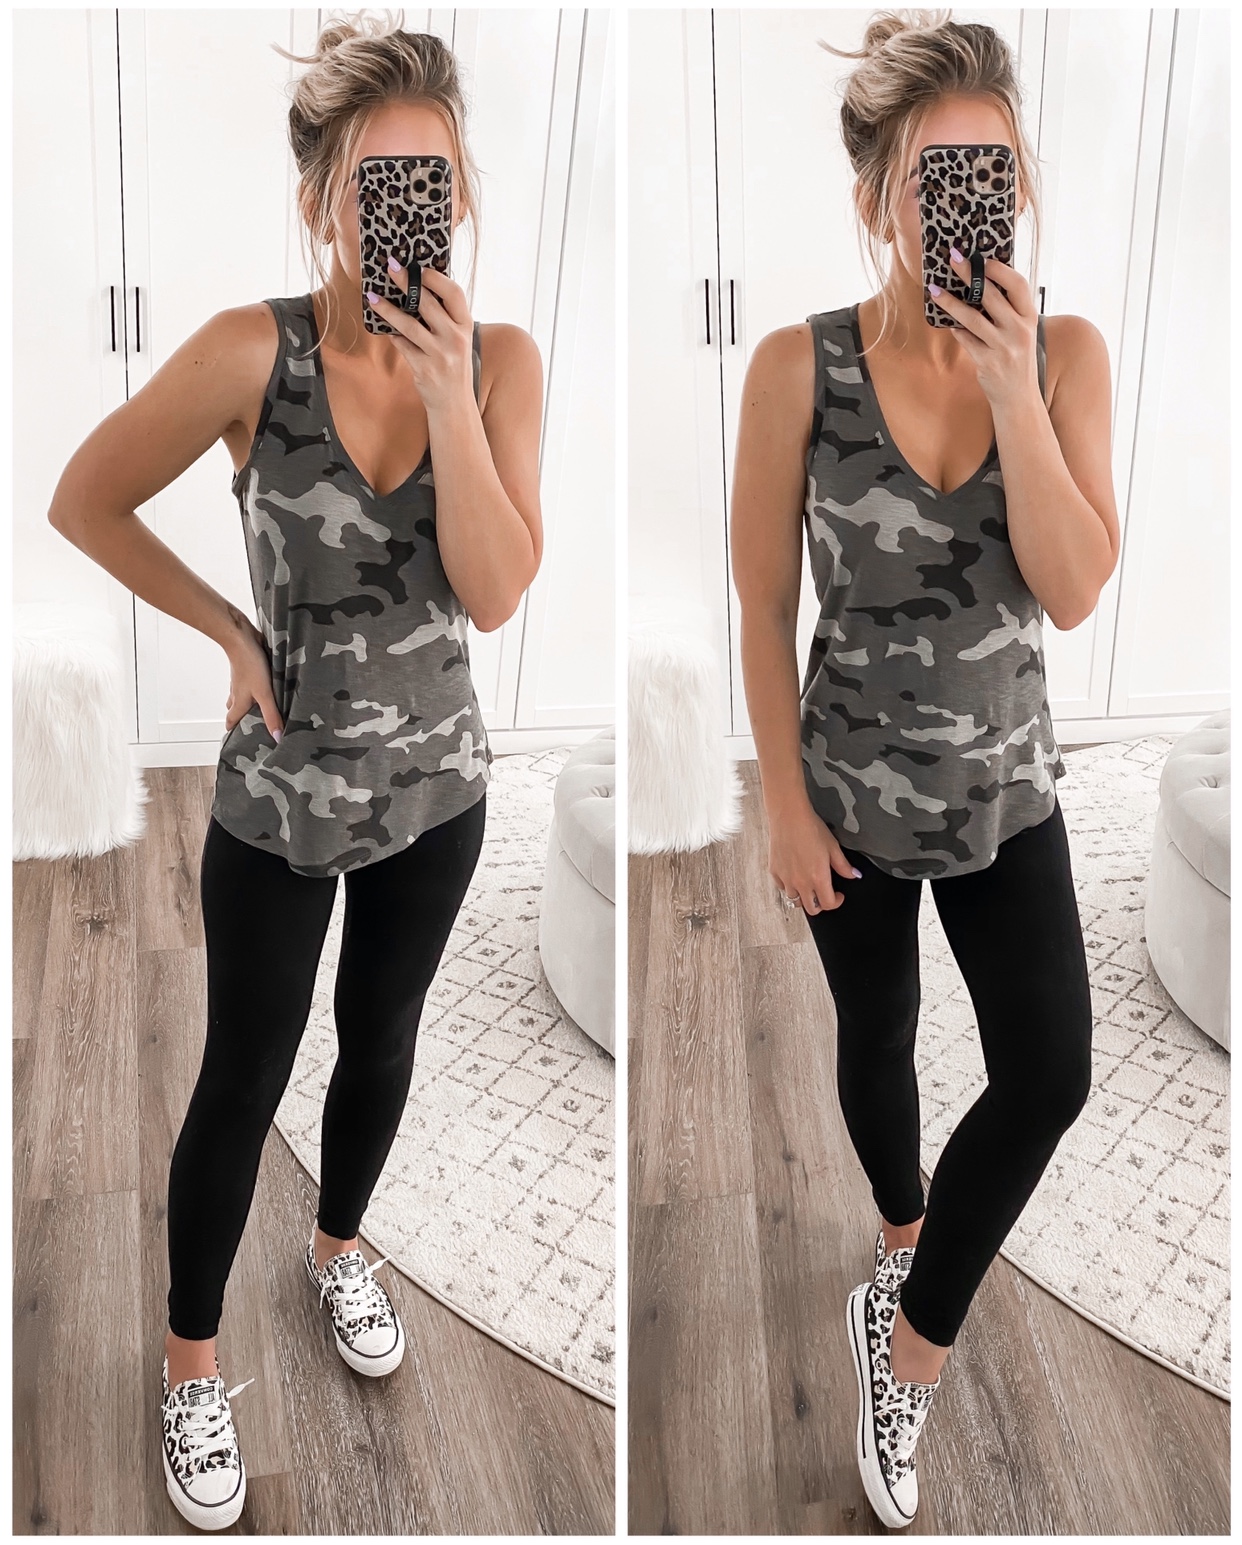 LAURA BEVERLIN BASIC LEGGINGS UNDER $20 CAMO TANK TOP CASUAL LOUNGE OUTFIT1